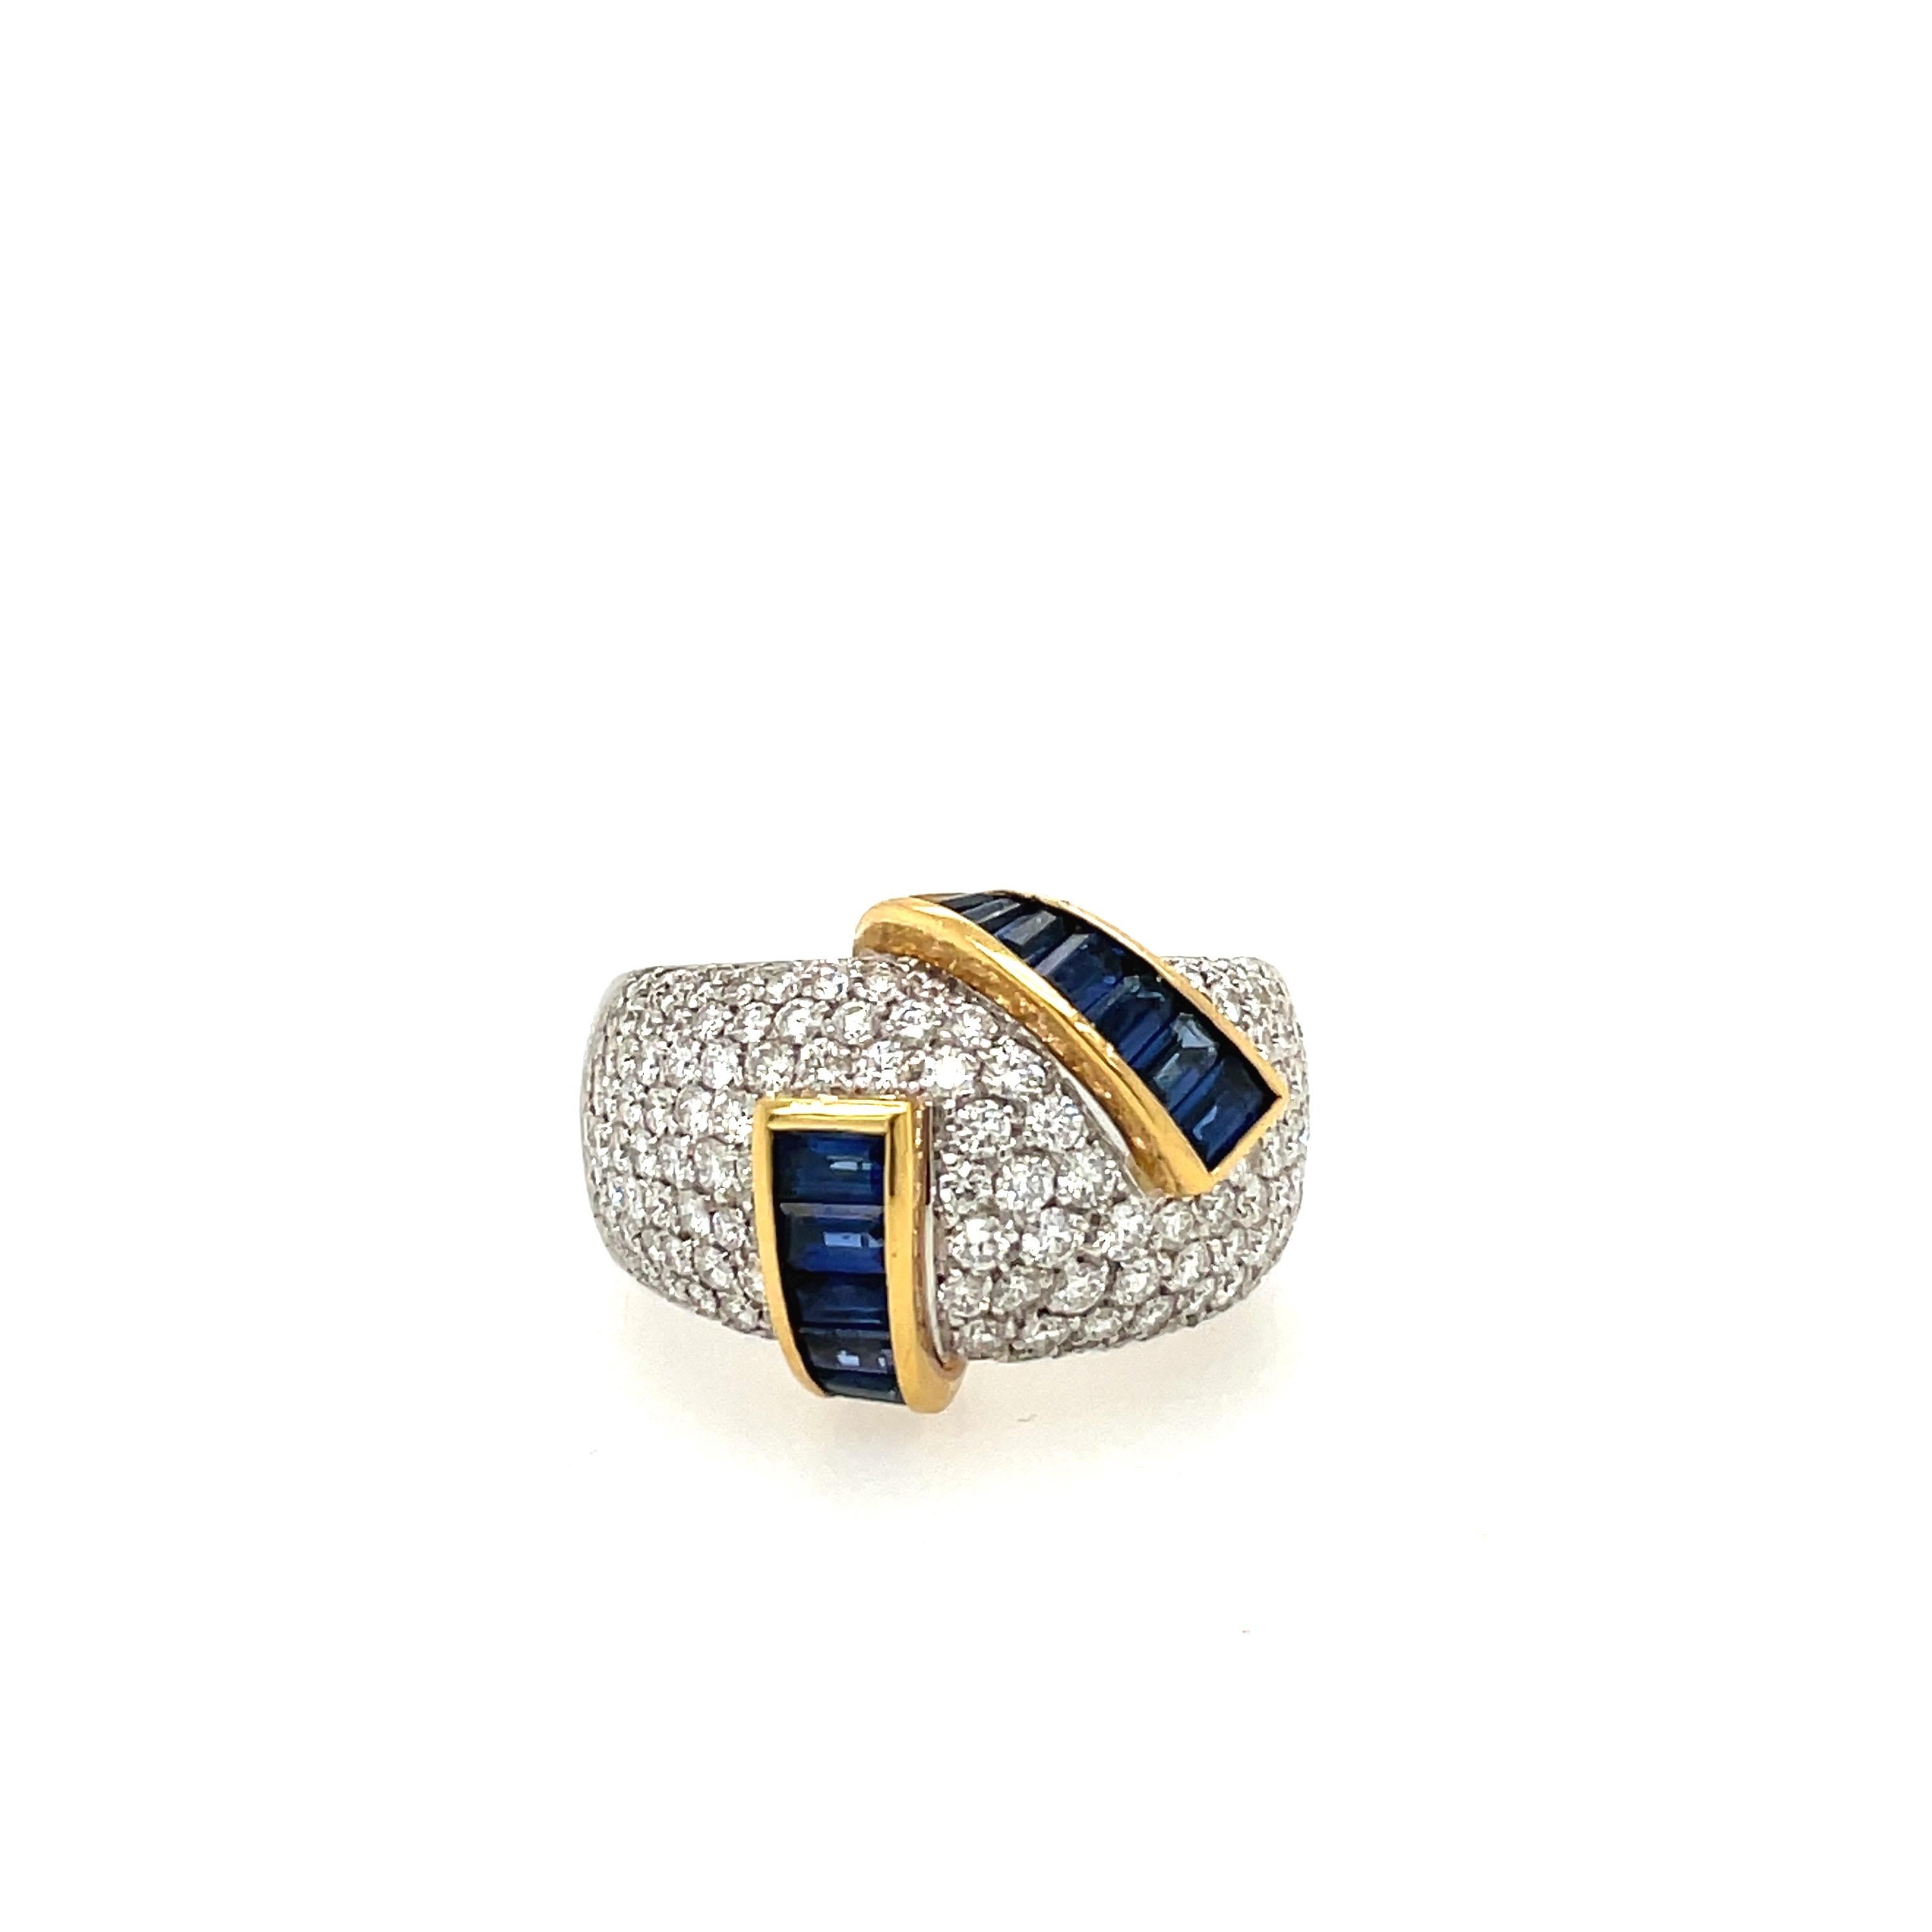 Alfieri & St. John have been master Italian goldsmiths since 1977. Known for breaking the rules of traditional jewelry and creating little masterpieces sometimes encompassing futuristic shapes.
This 18 karat yellow and white gold ring is a perfect